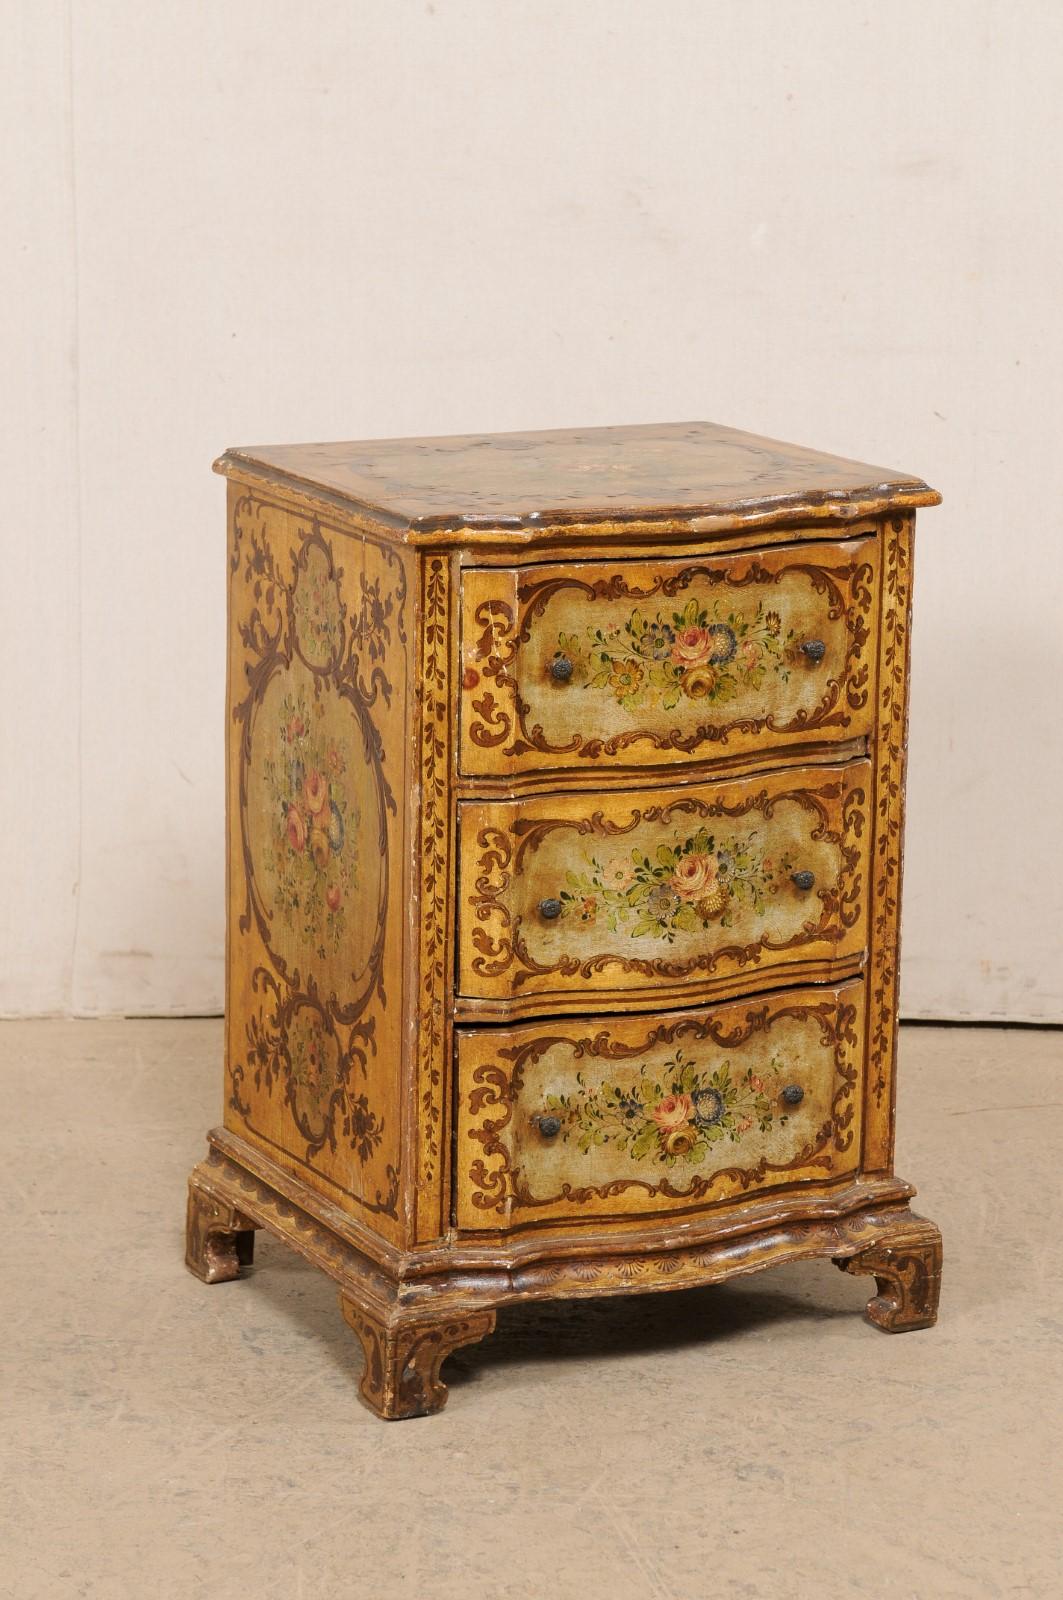 Italian 19th C. Petite Serpentine Chest with Hand-Painted Floral Embellishments For Sale 1